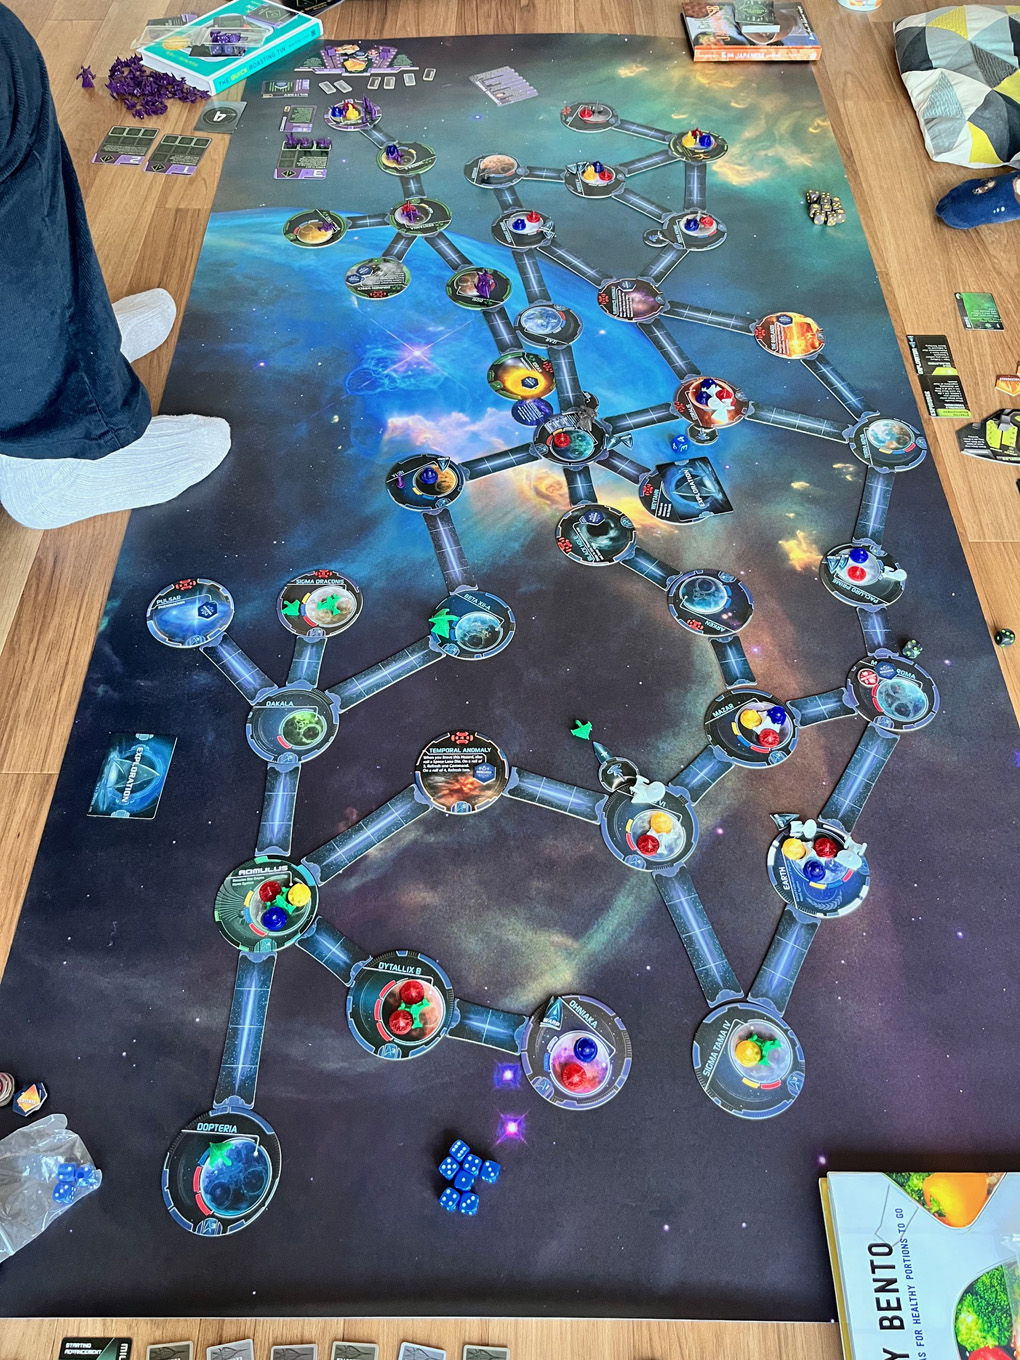 A large gameboard with galaxies, planets and other celestial bodies is spread over a wooden floor. The board is covered in counters, small model spaceships and other game parts.